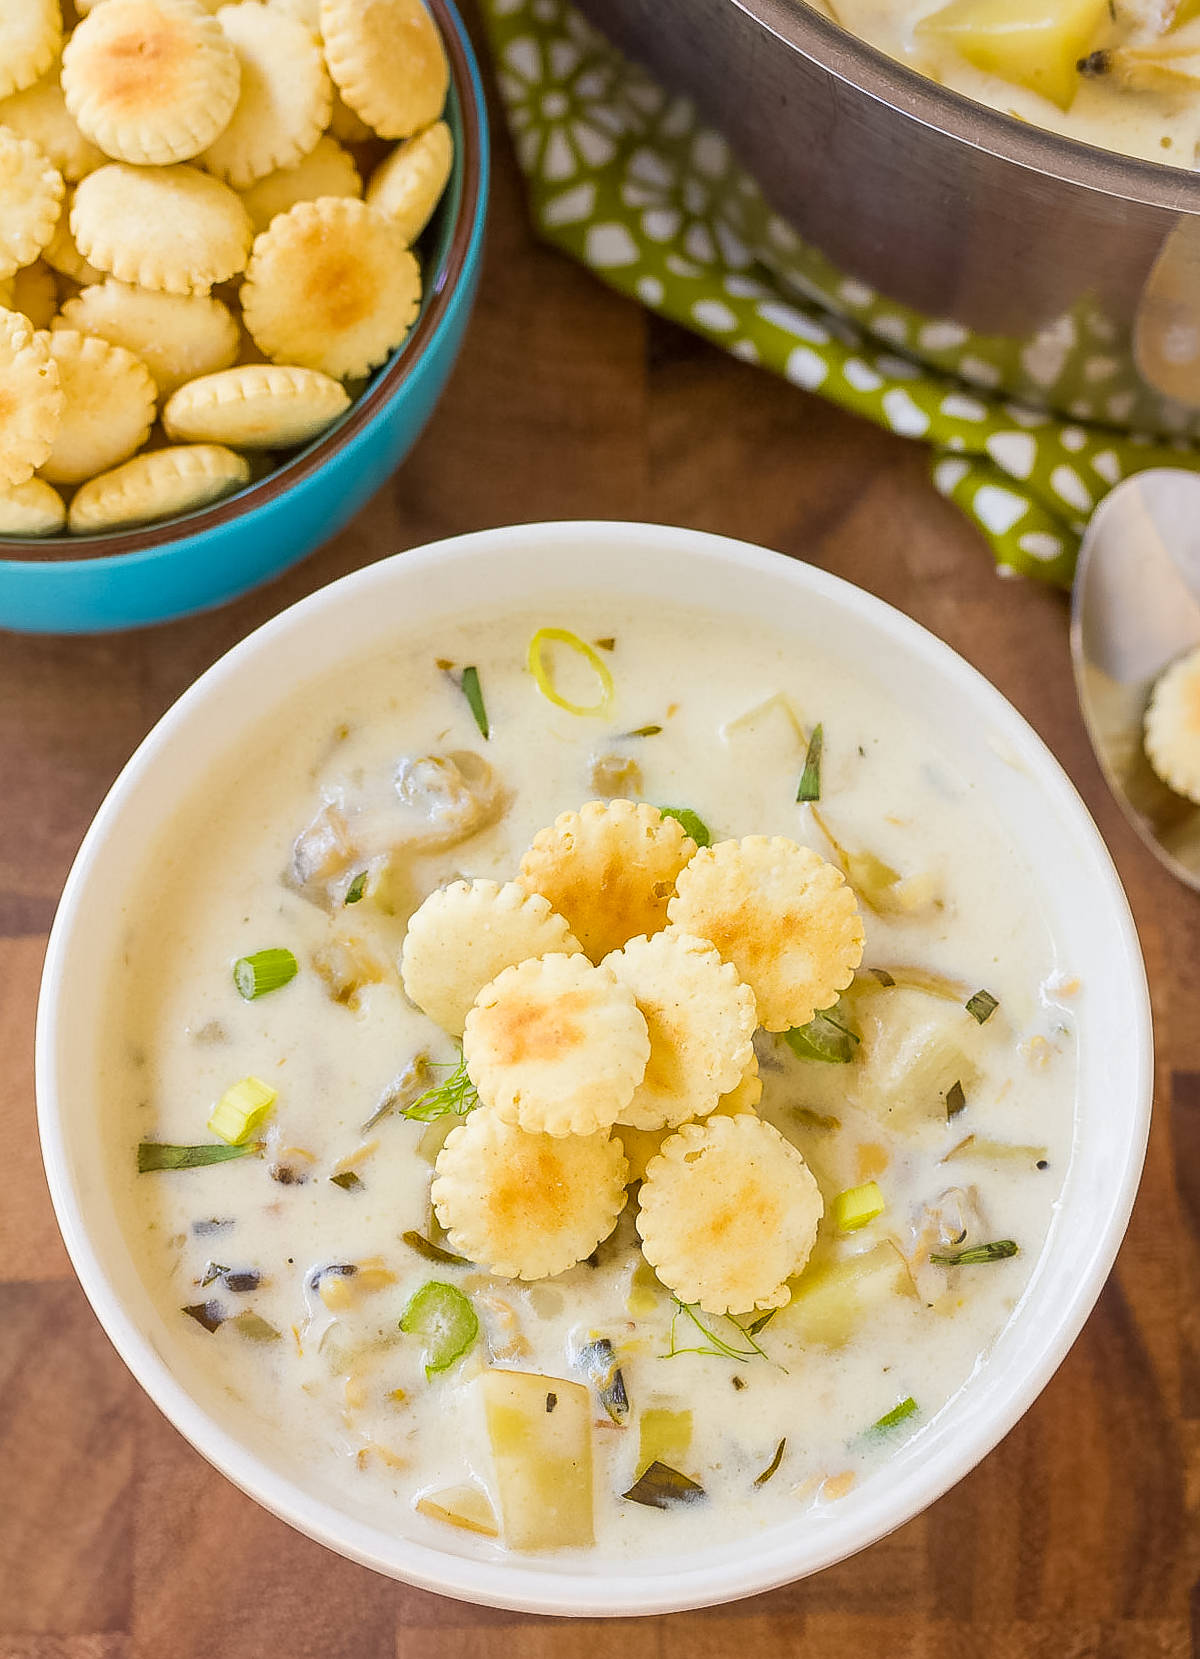 Yummy New England Clam Chowder Topped With Biscuits Wallpaper